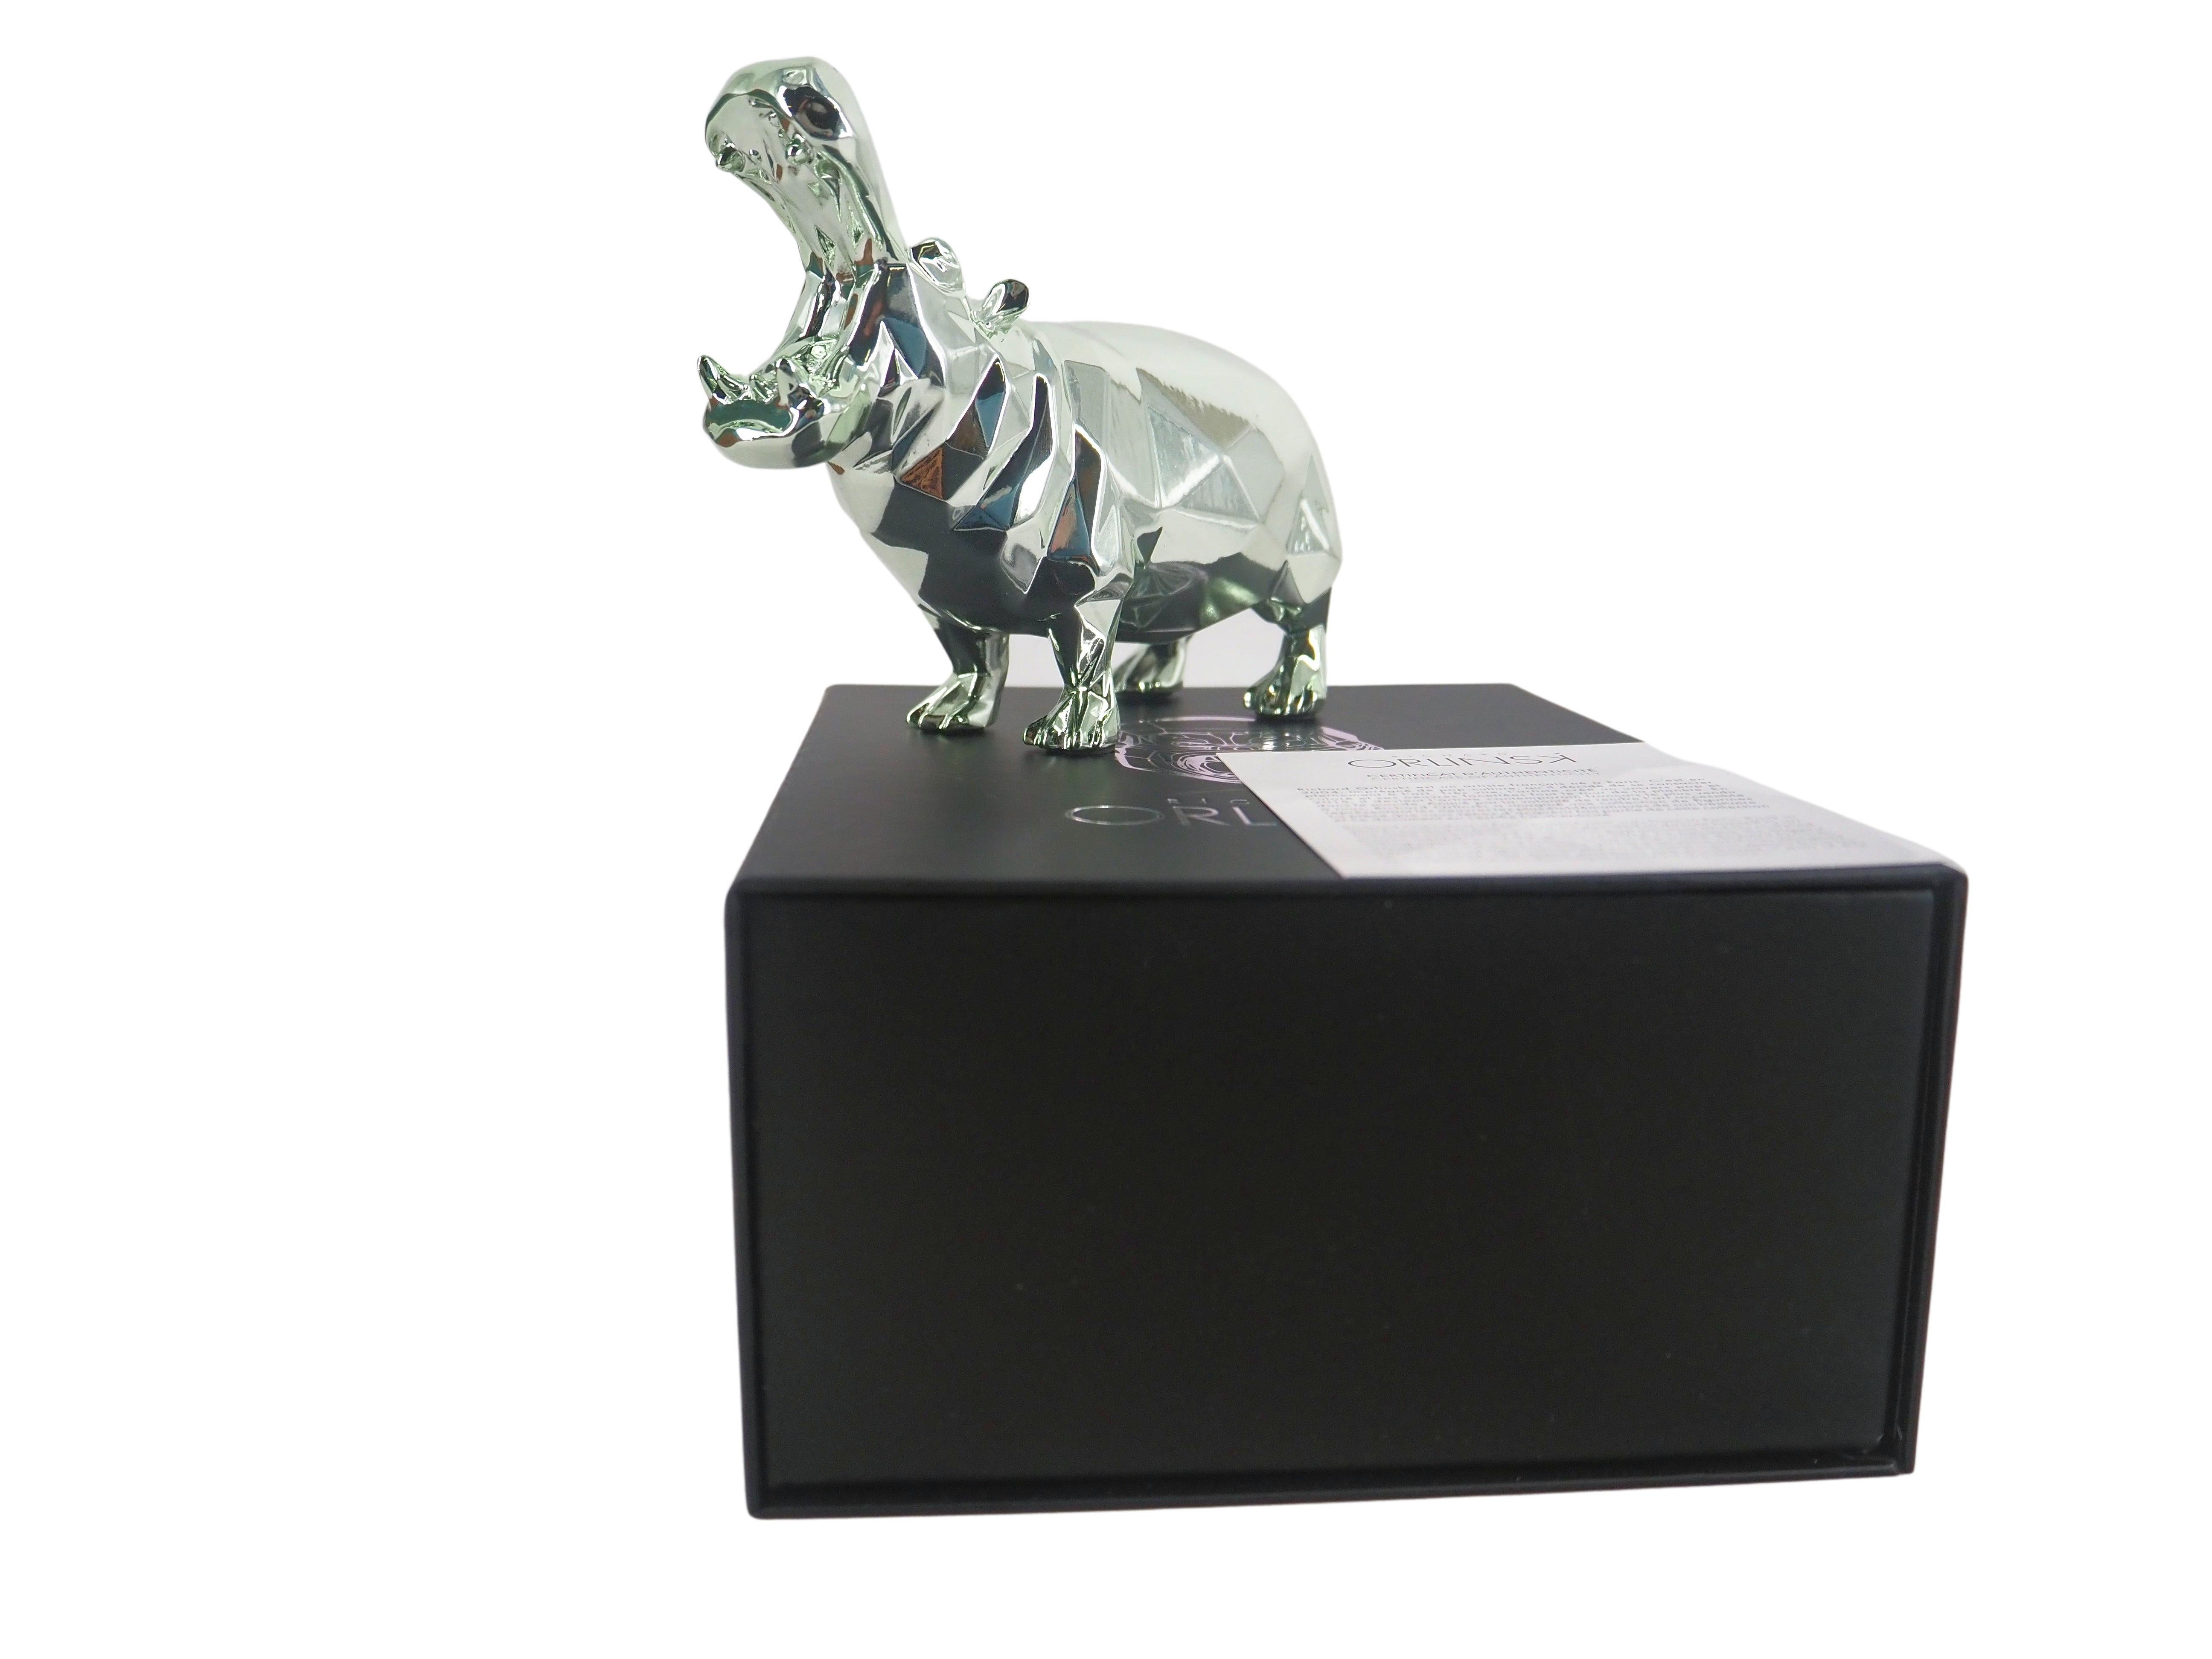 Richard ORLINSKI
Hippo Spirit (Water green Edition)

Sculpture in resin
Metallic Green
About 15 x11 x 6 cm (c. 6 x 4.3 x 2.4 in)
Presented in original box with certificate

Excellent condition